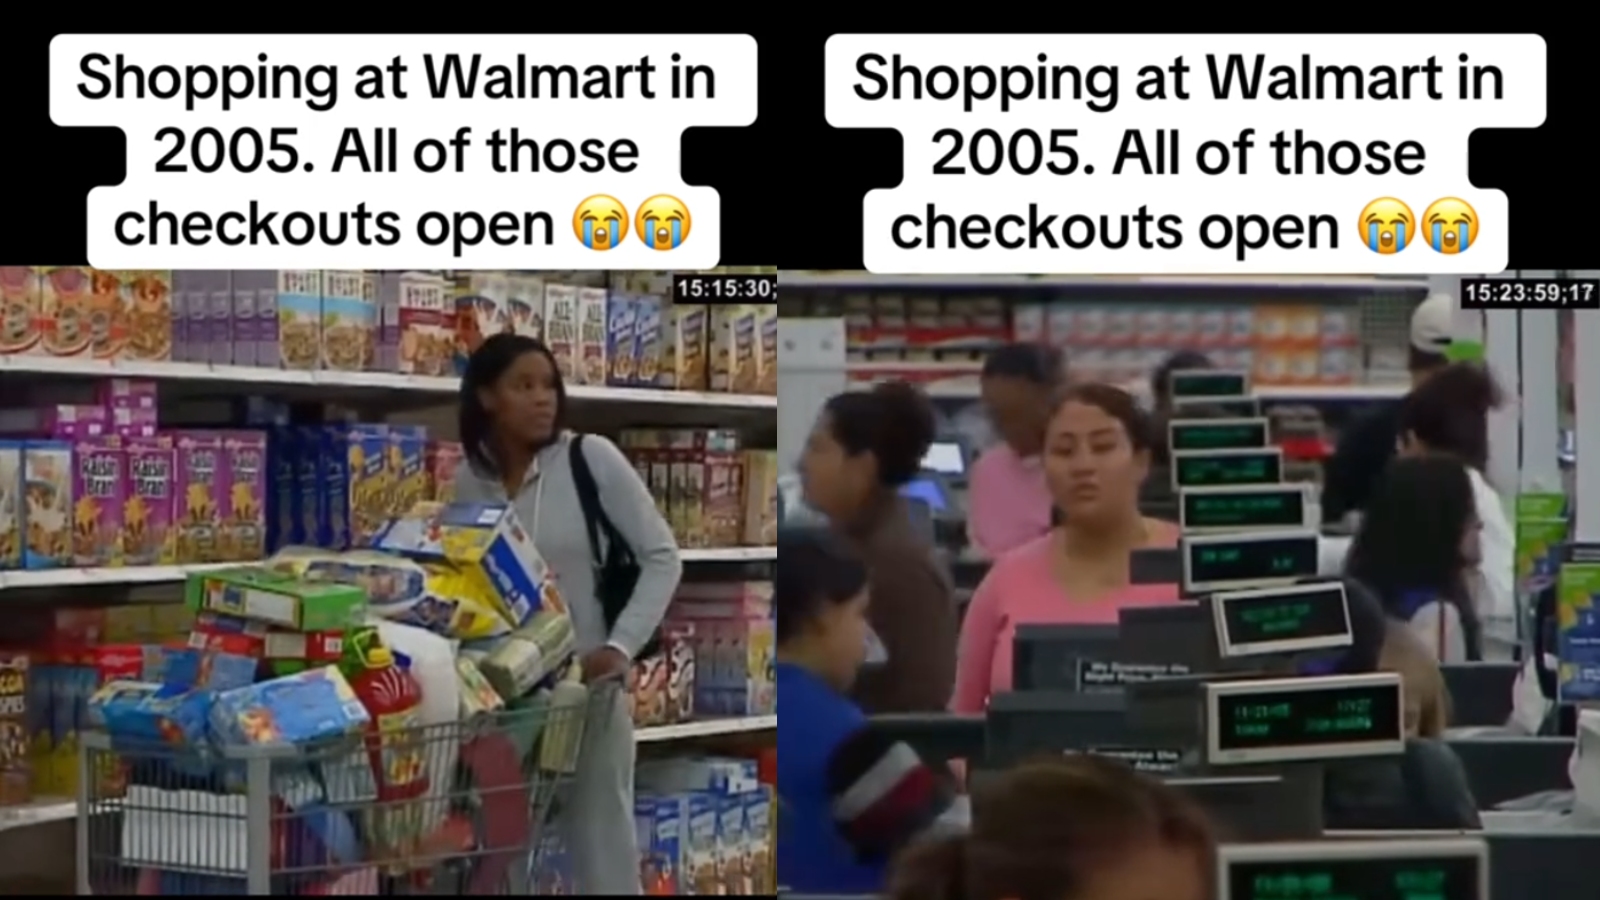 People feeling “nostalgic” after video shows what shopping at Walmart was like 20 years ago